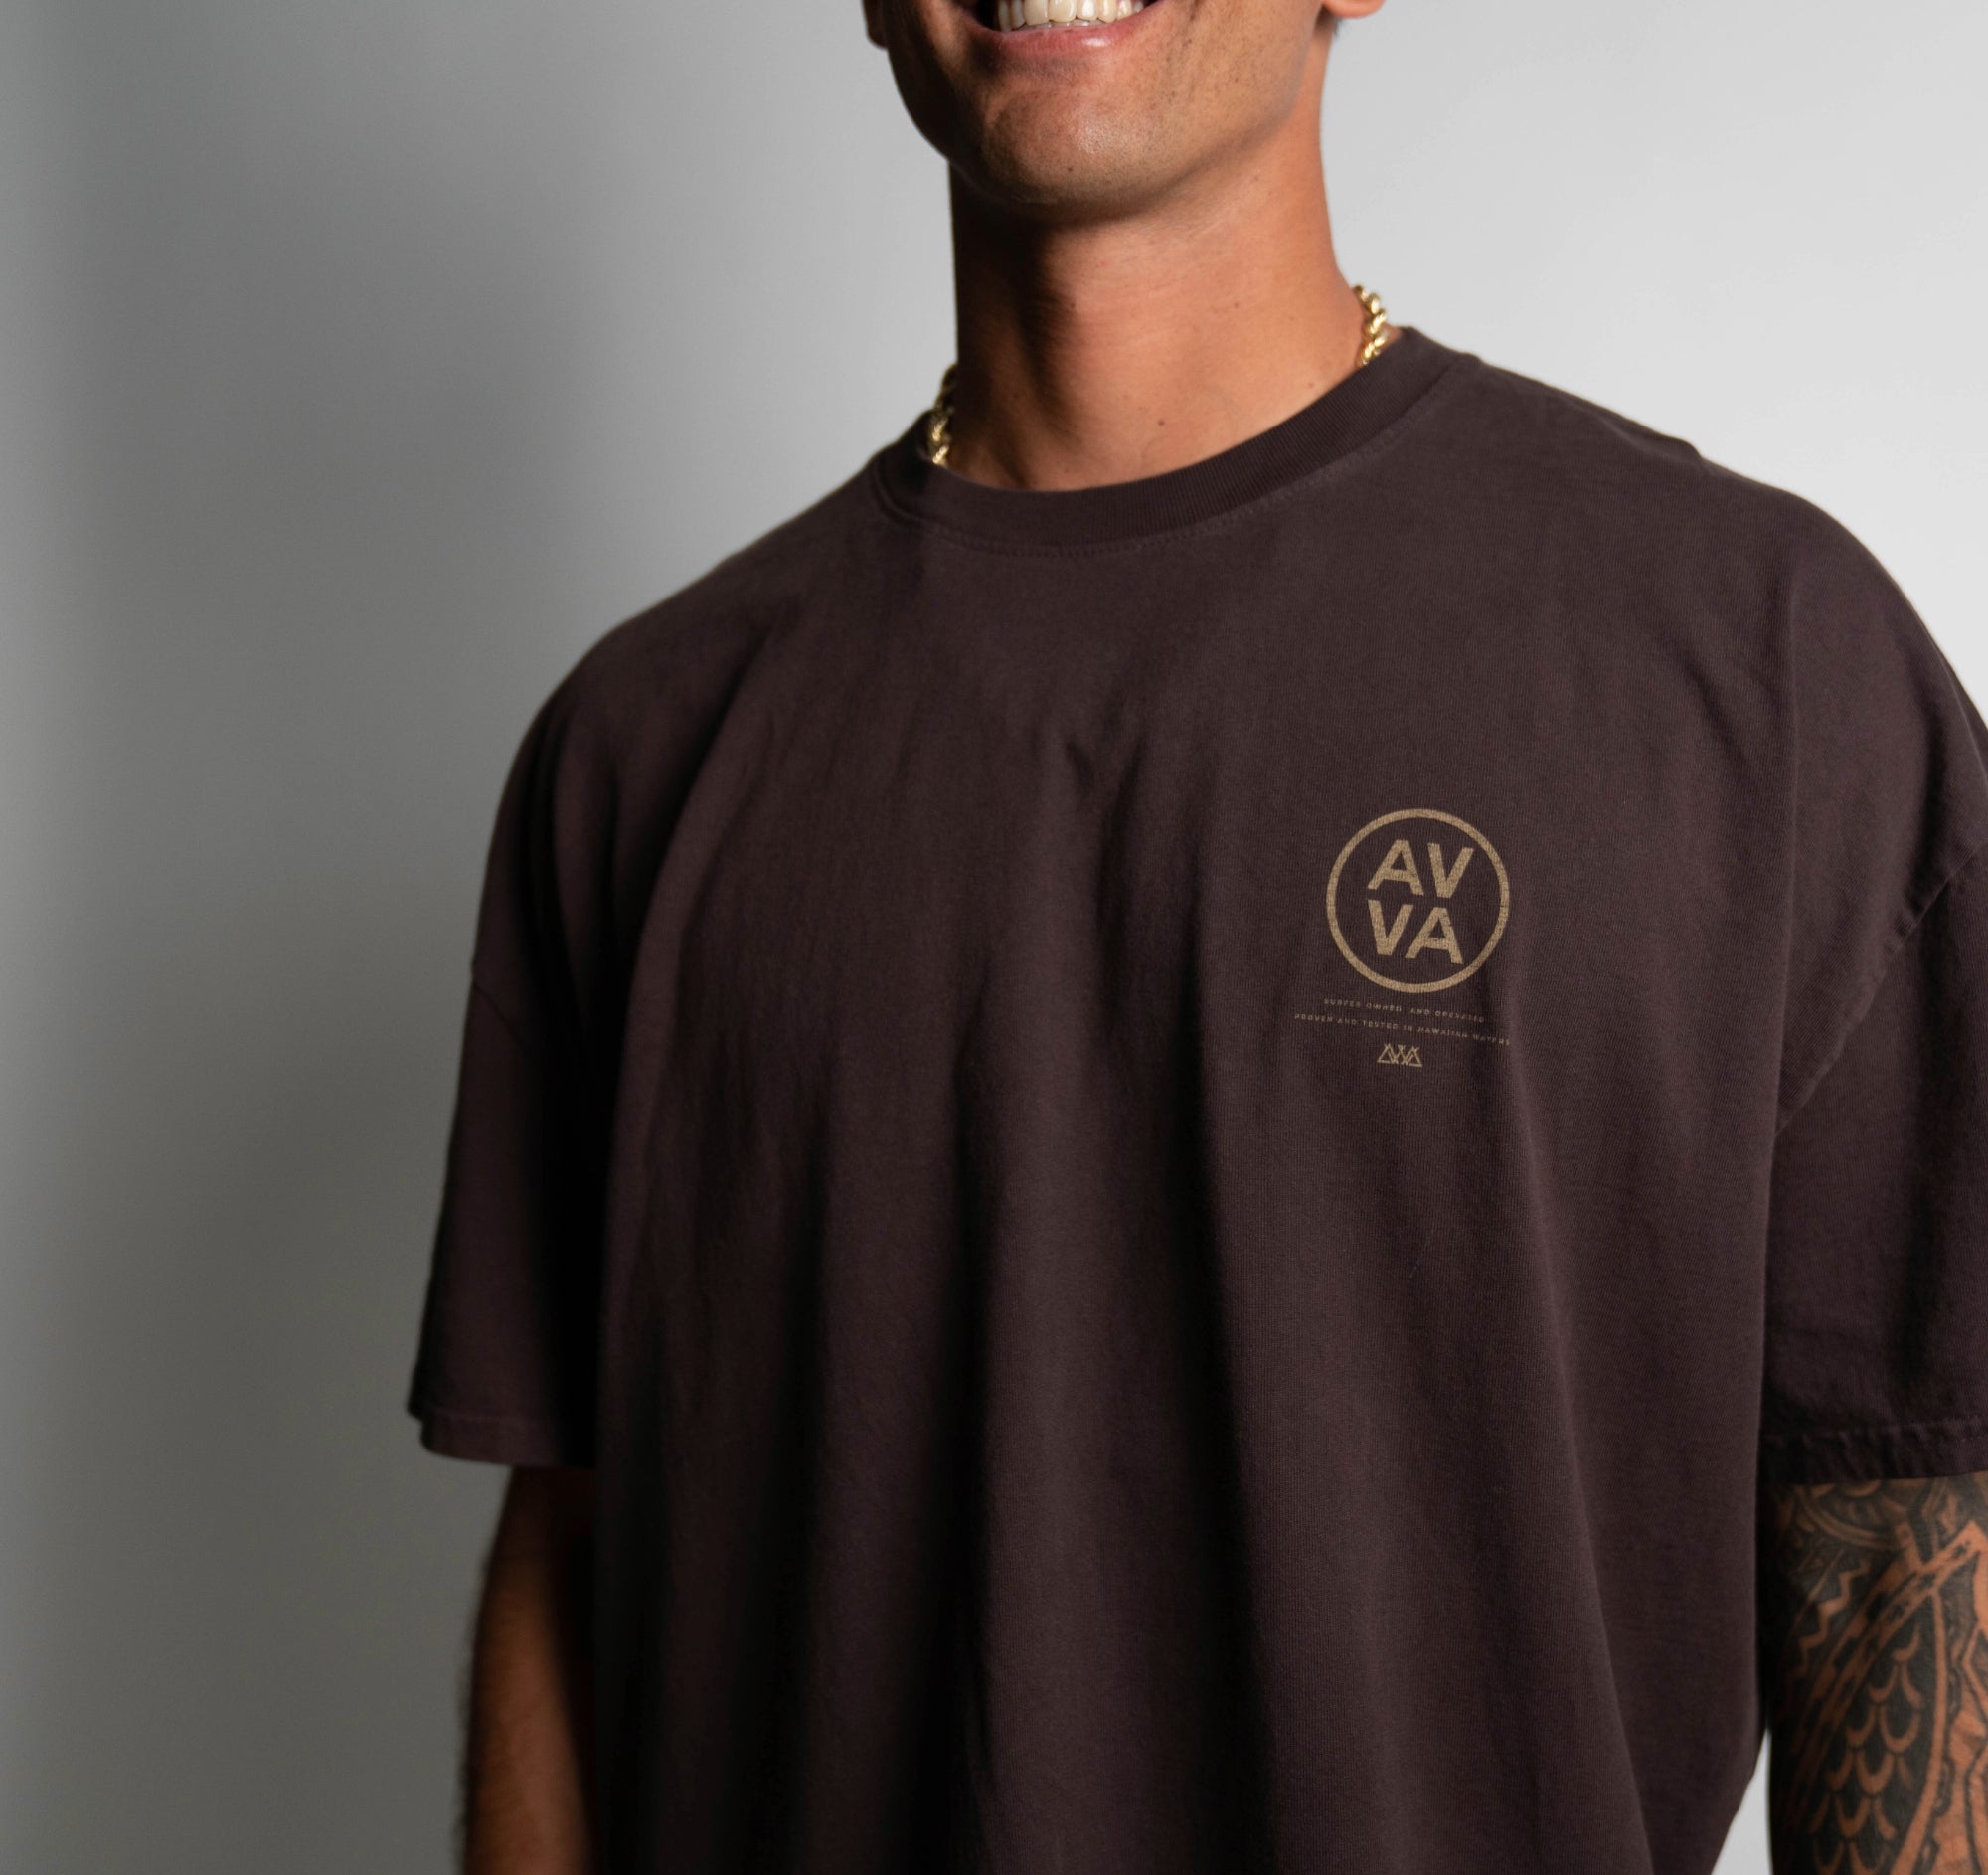 FRONT VIEW OF BROWN HEAVYWEIGHT CREED TEE ON MODEL LOOKING FORWARD. HIGHLIGHTING TOP RIGHT AVVA LOGO.